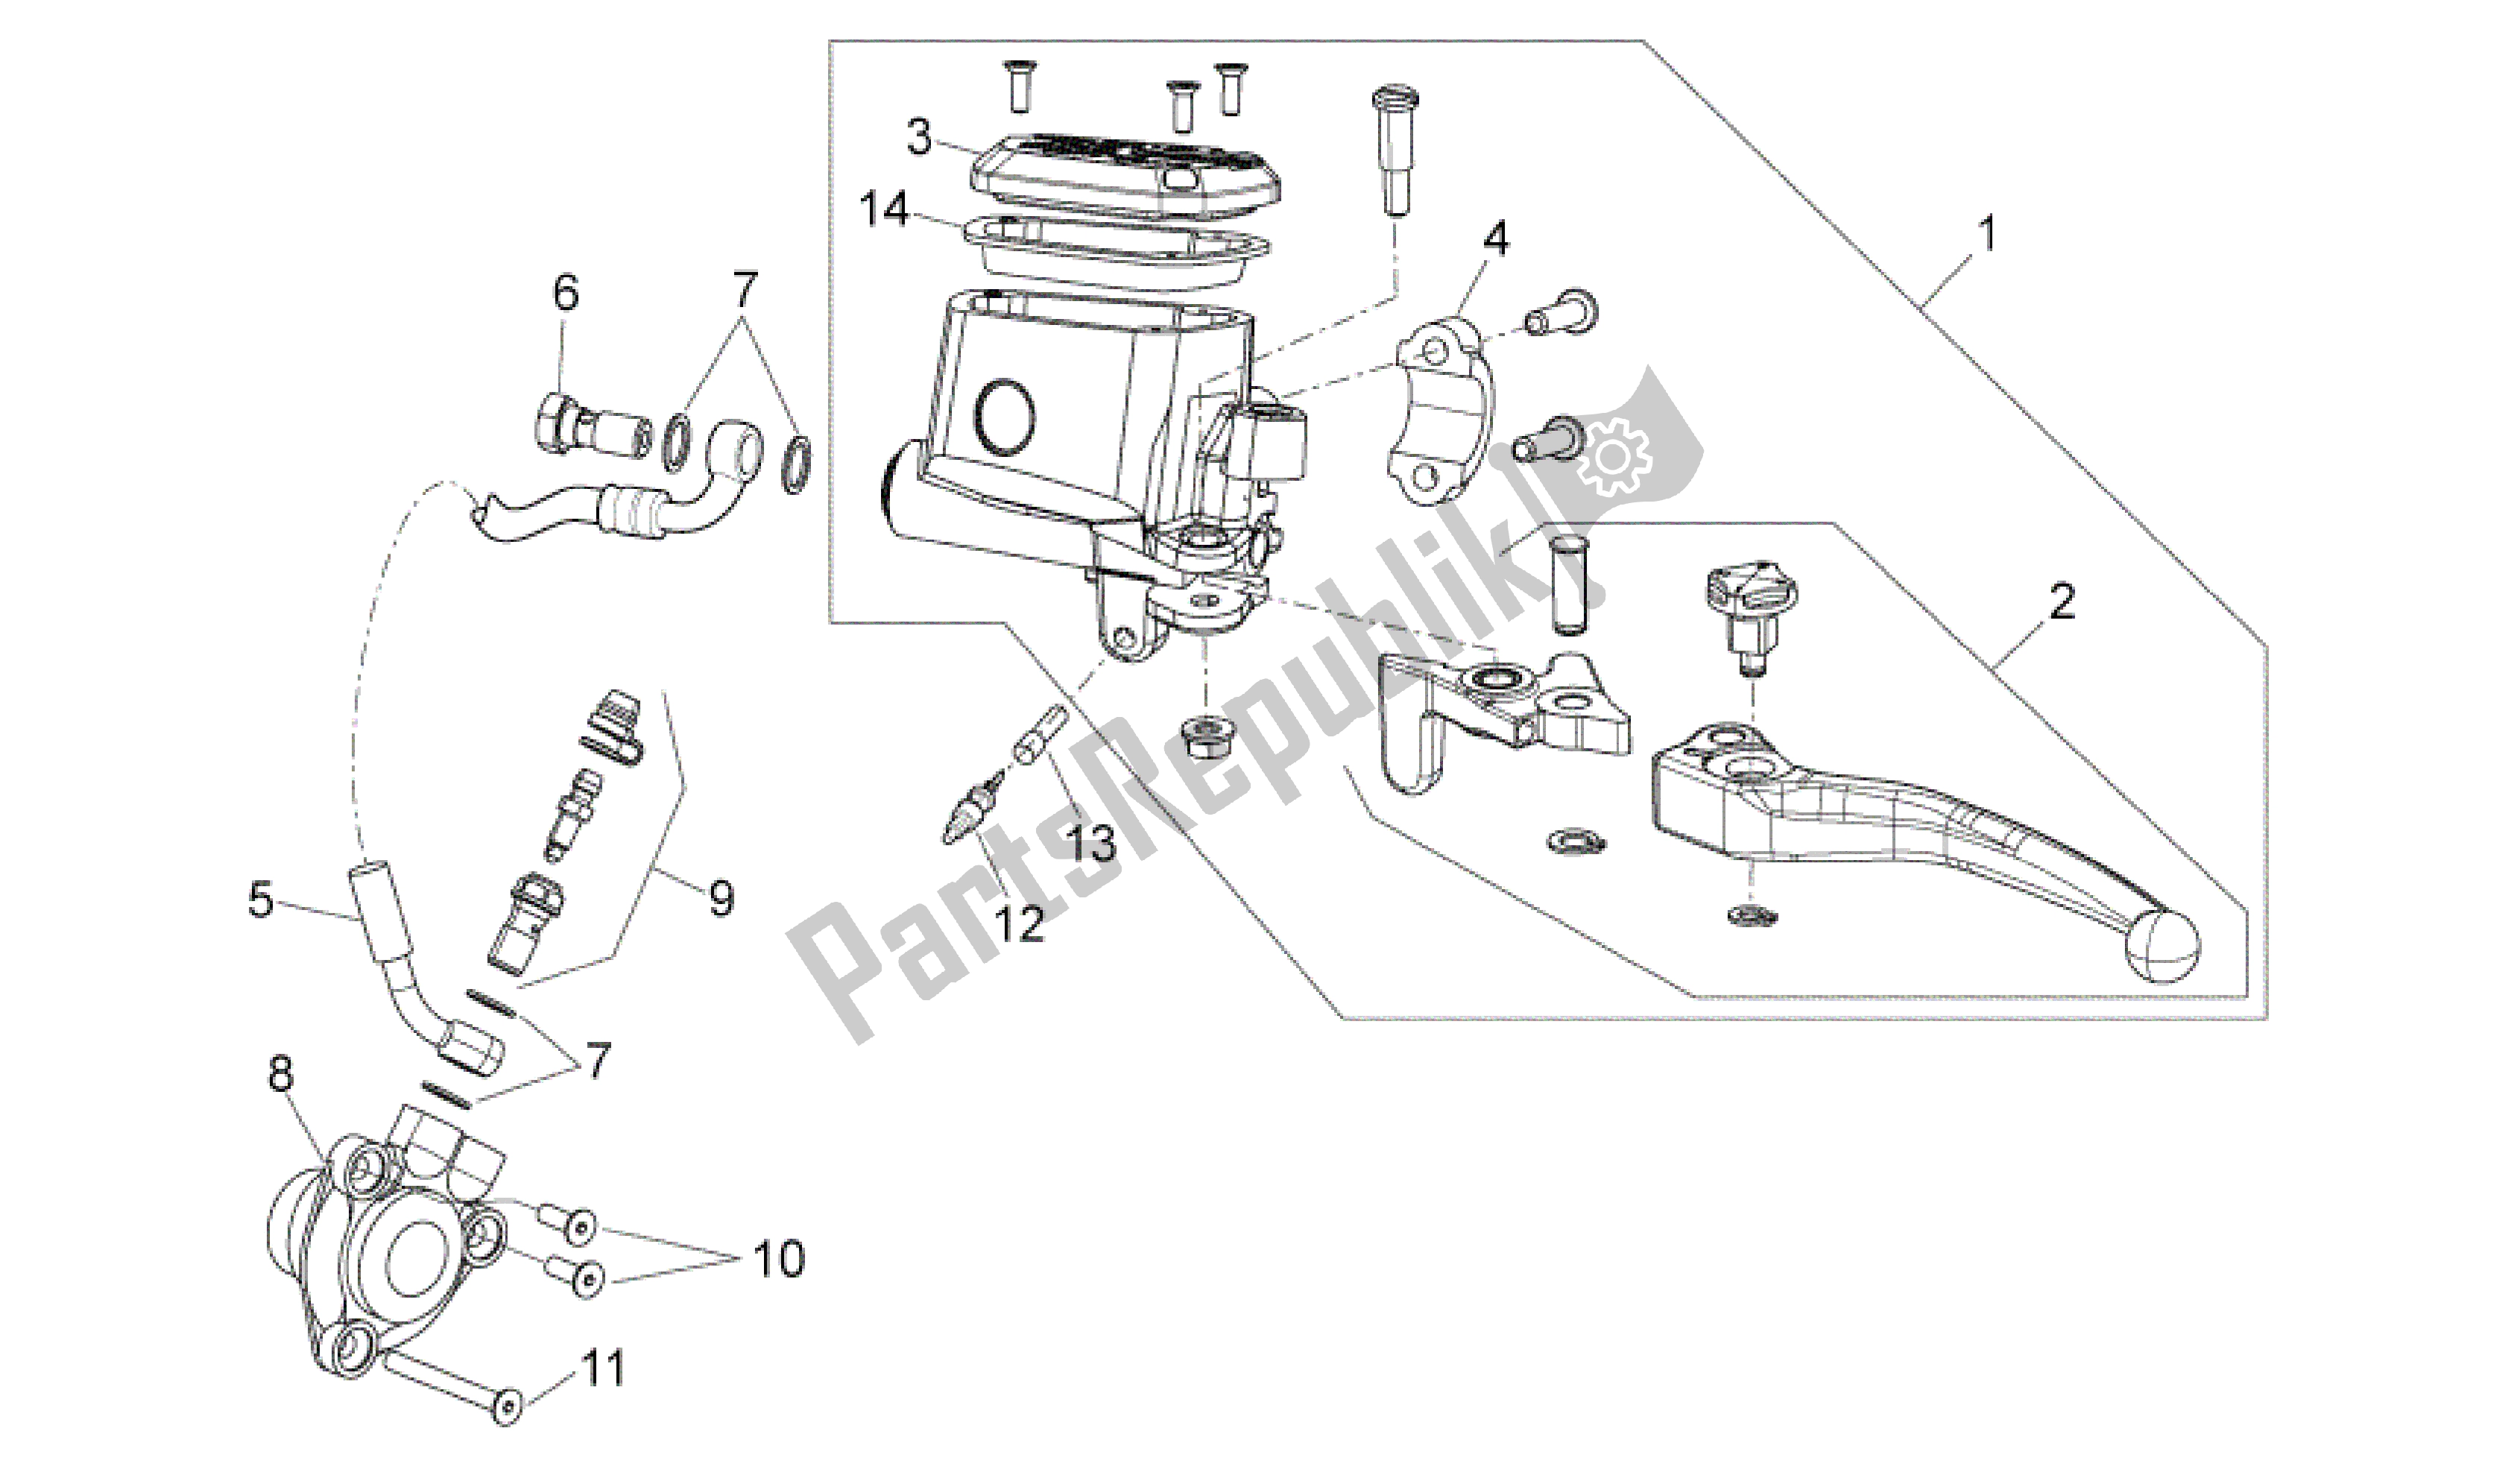 All parts for the Clutch Pump of the Aprilia Shiver 750 2007 - 2009